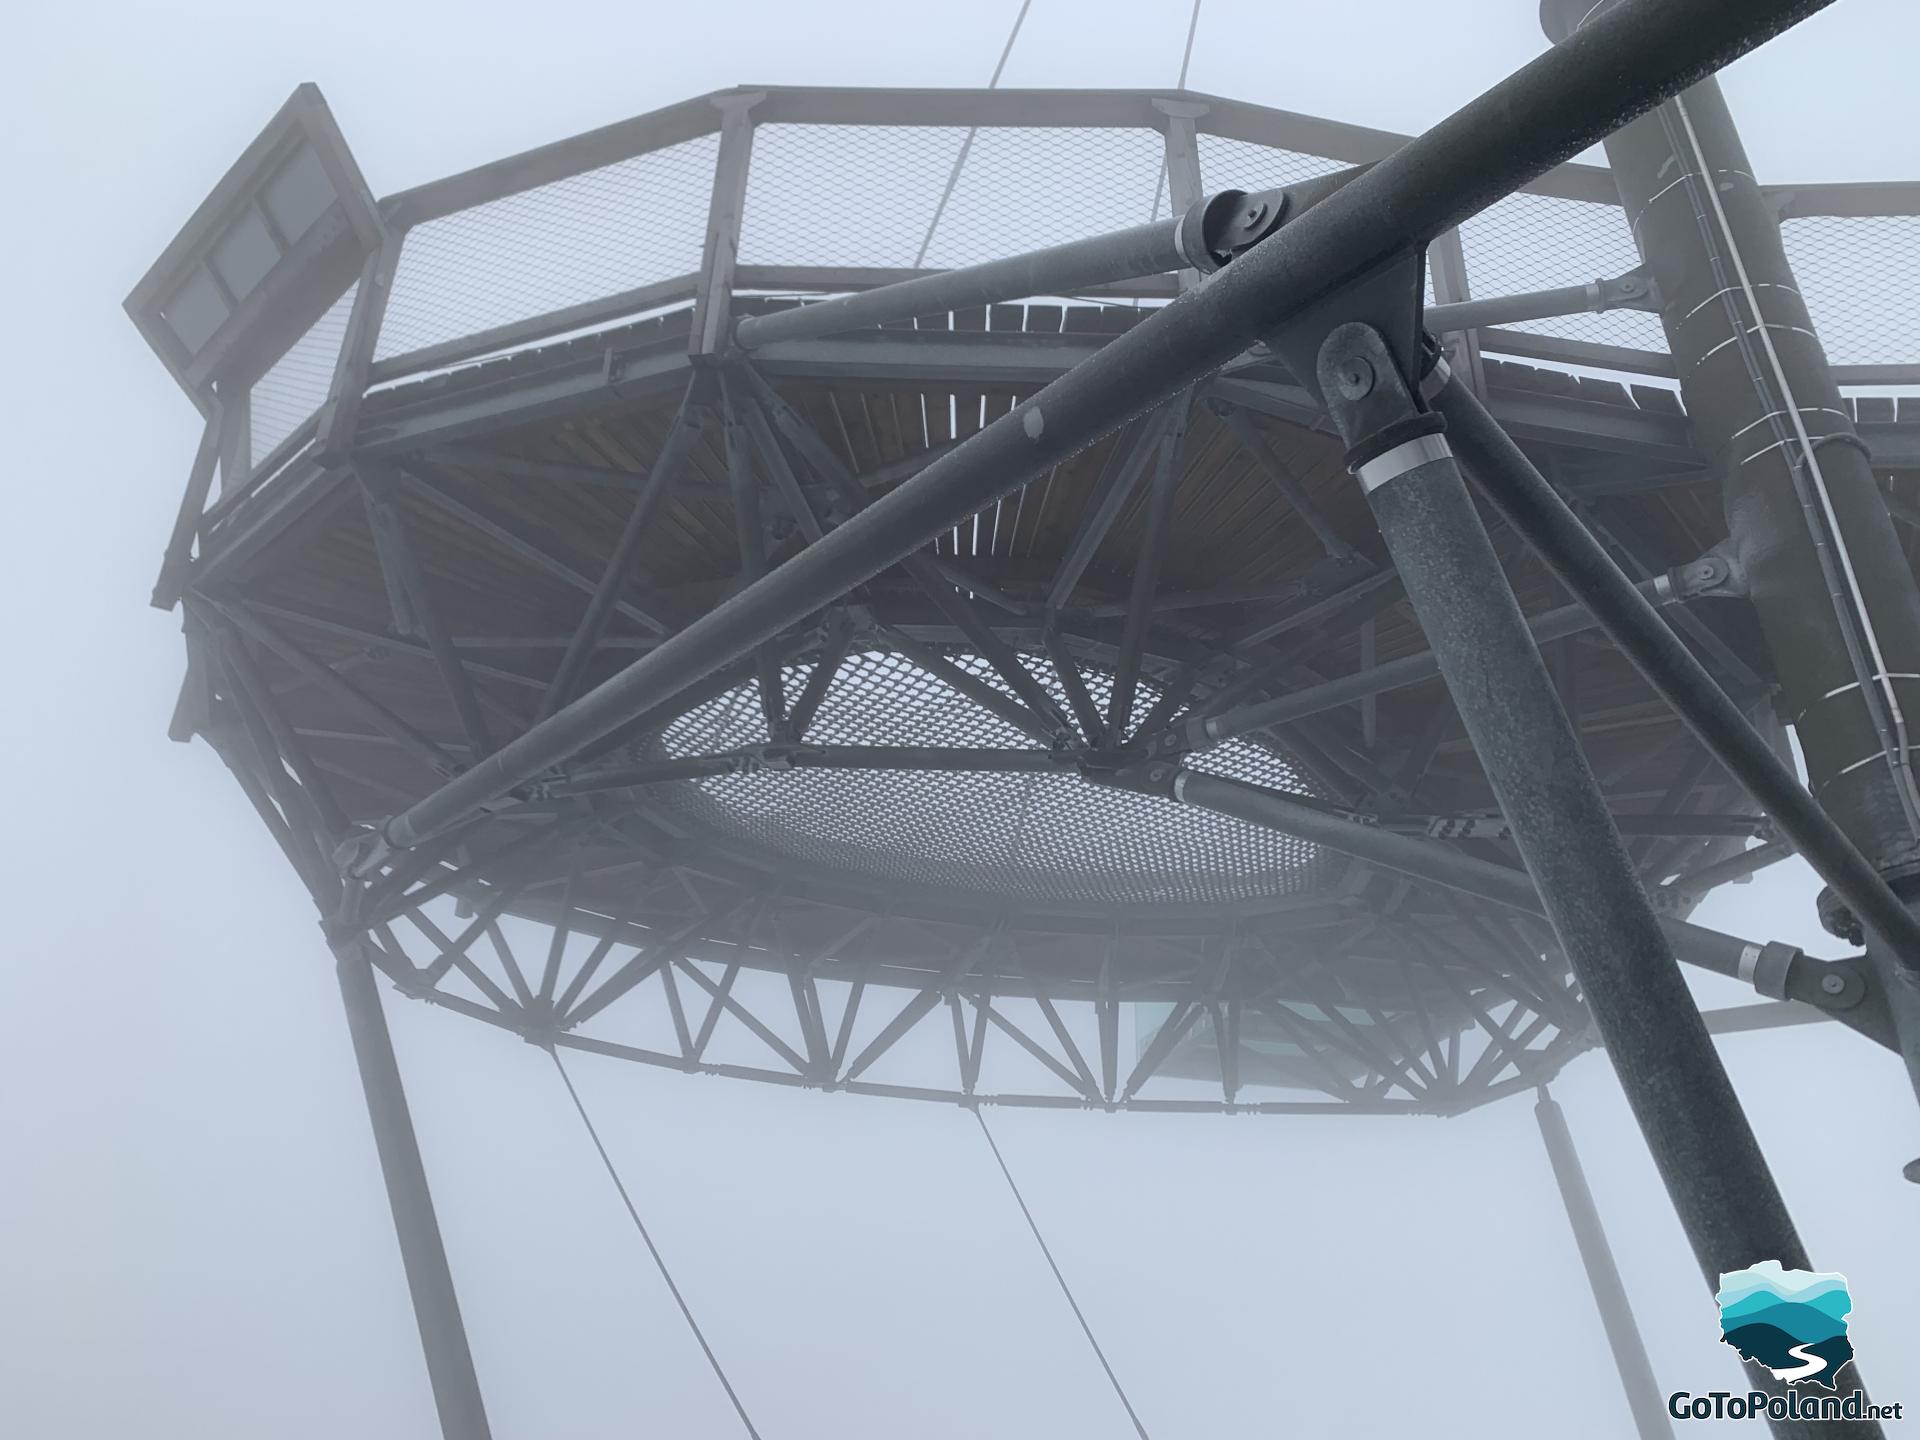 n the fog at a very high altitude hangs an attraction for tourists in the form of a drop-shaped net